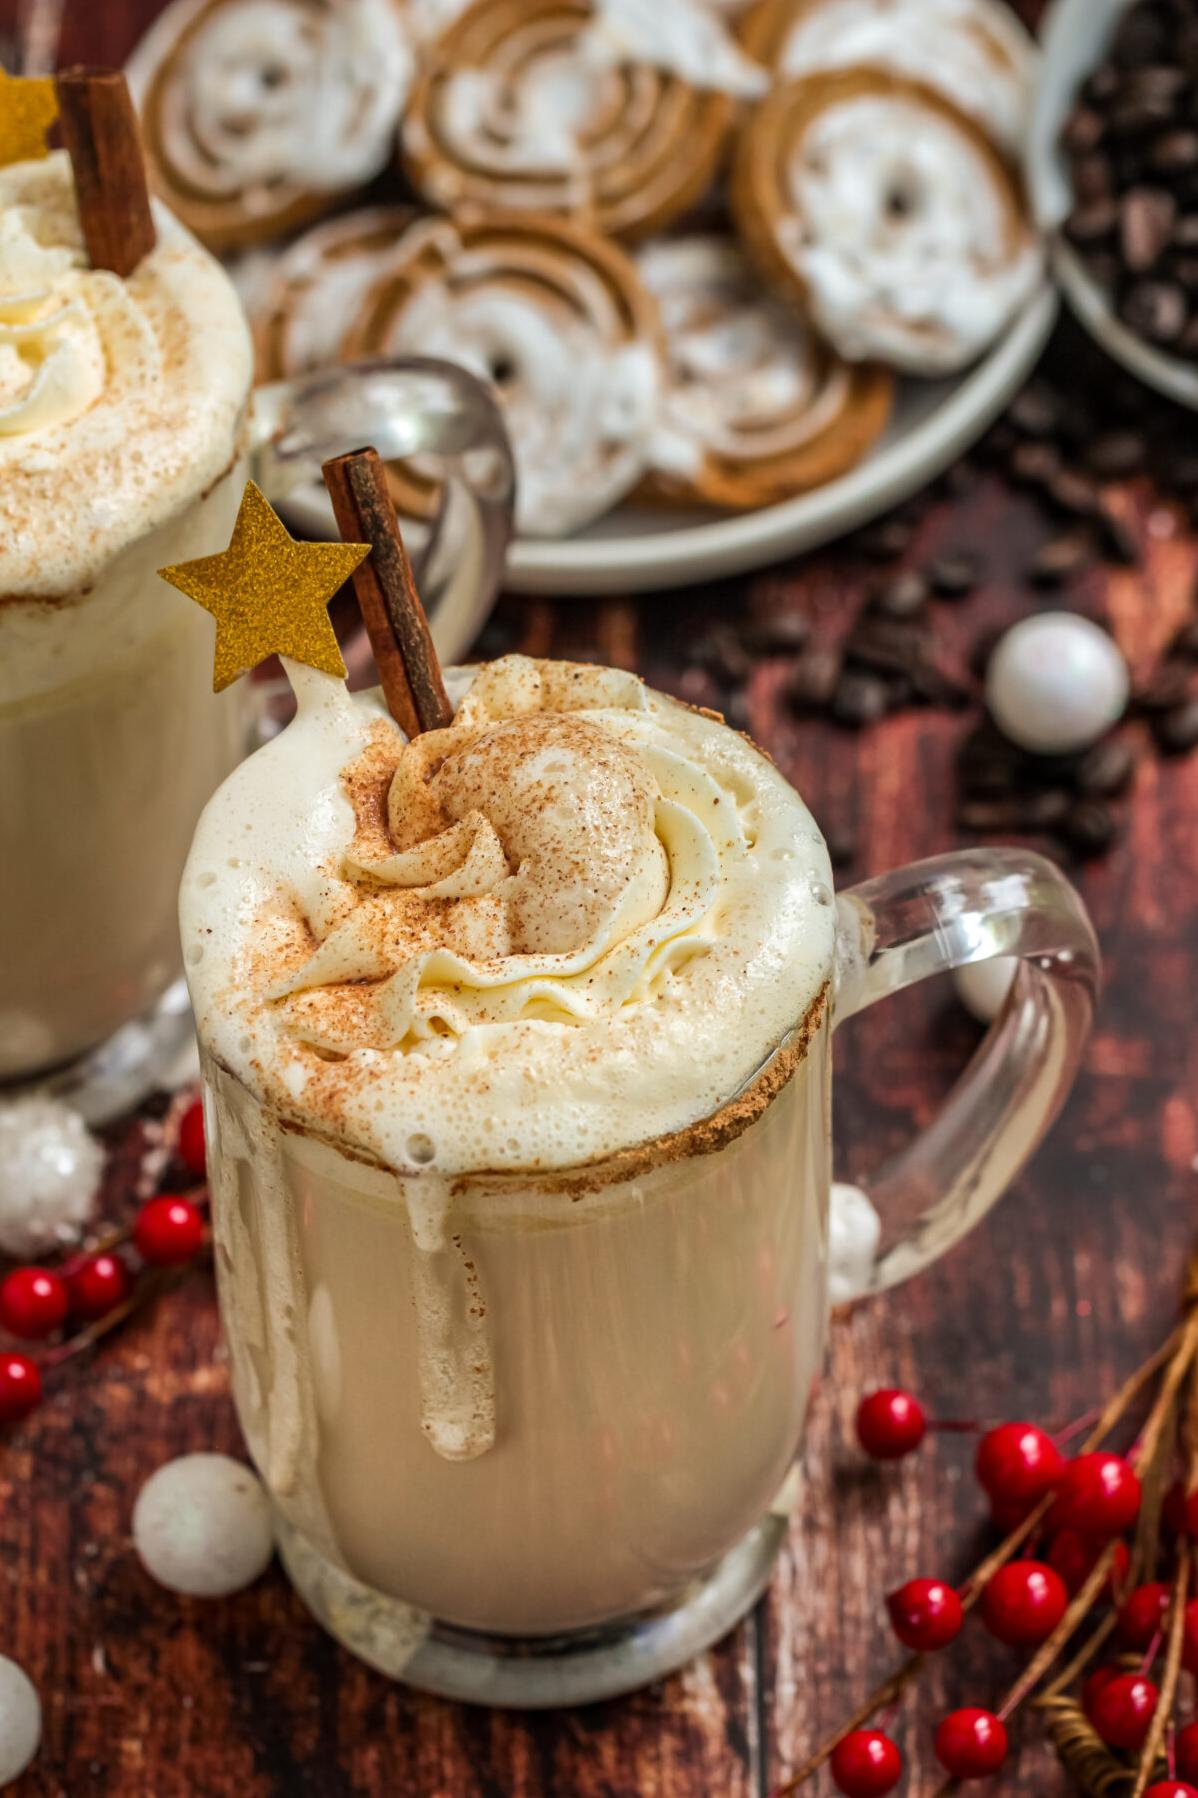  Let your taste buds dance with every sip of this creamy eggnog latte.